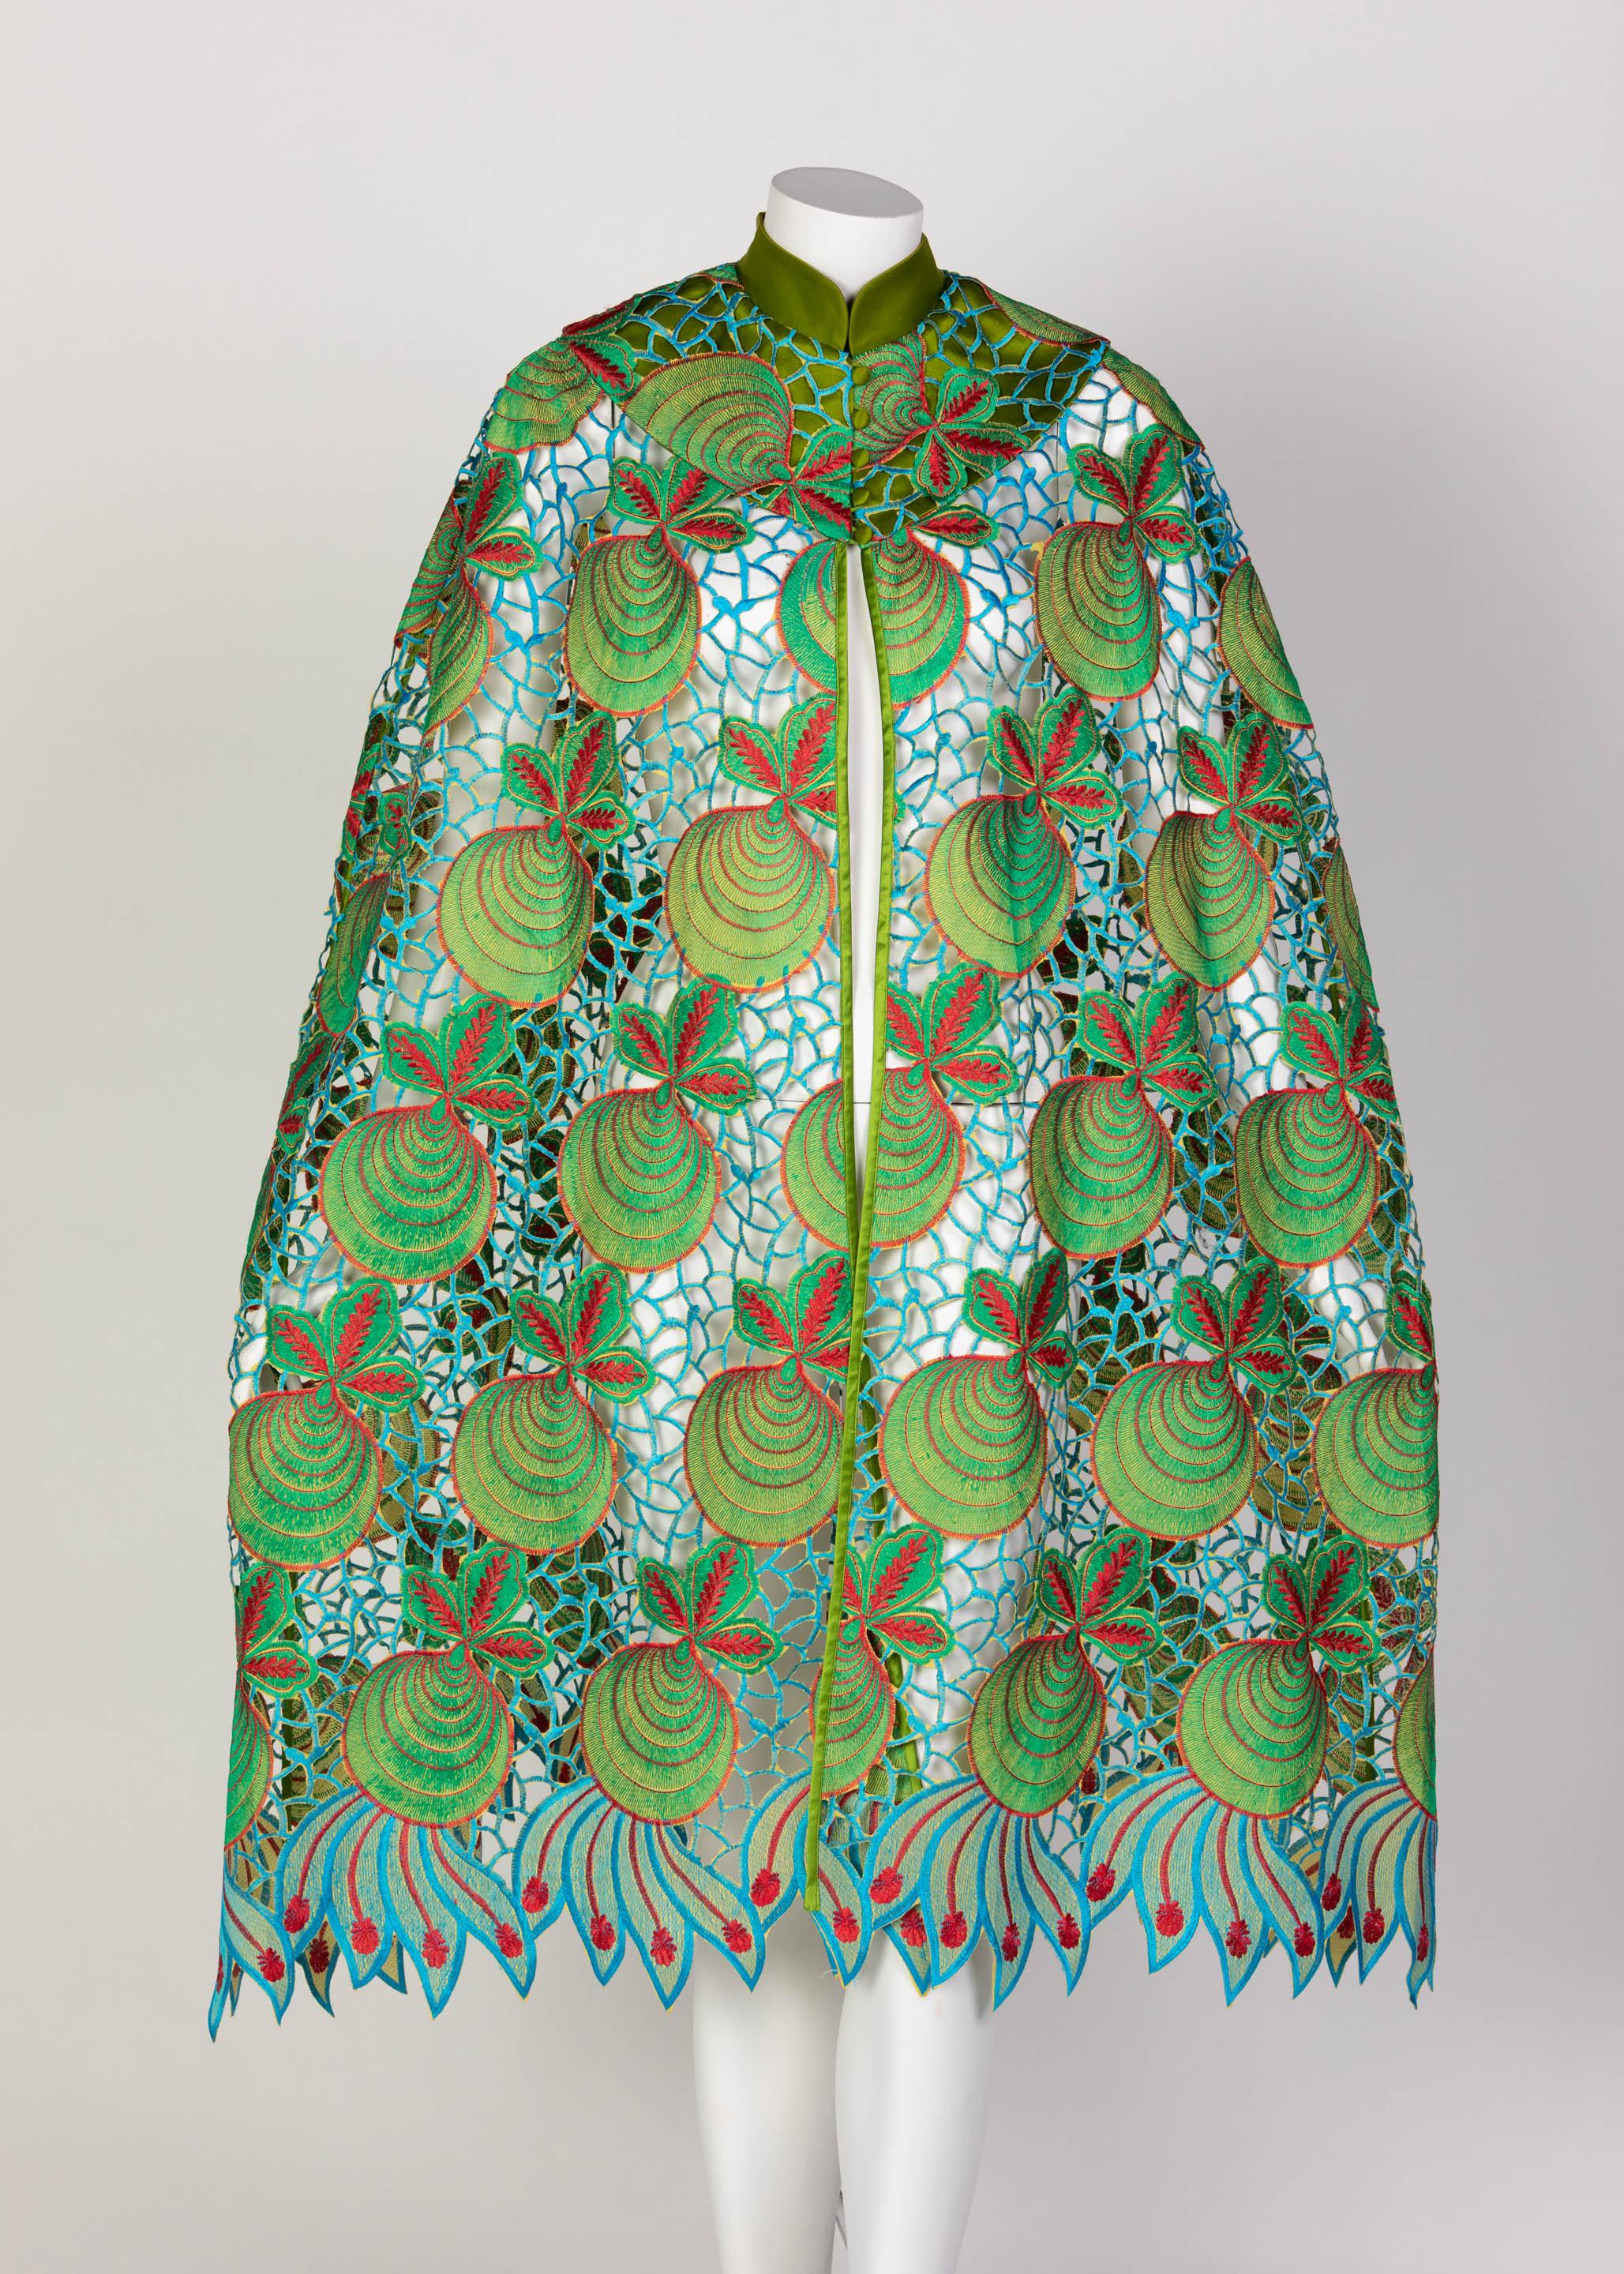 Women's Duro Olowu Green Blue Red Cut Out Silk Lace Cape, 2012 For Sale